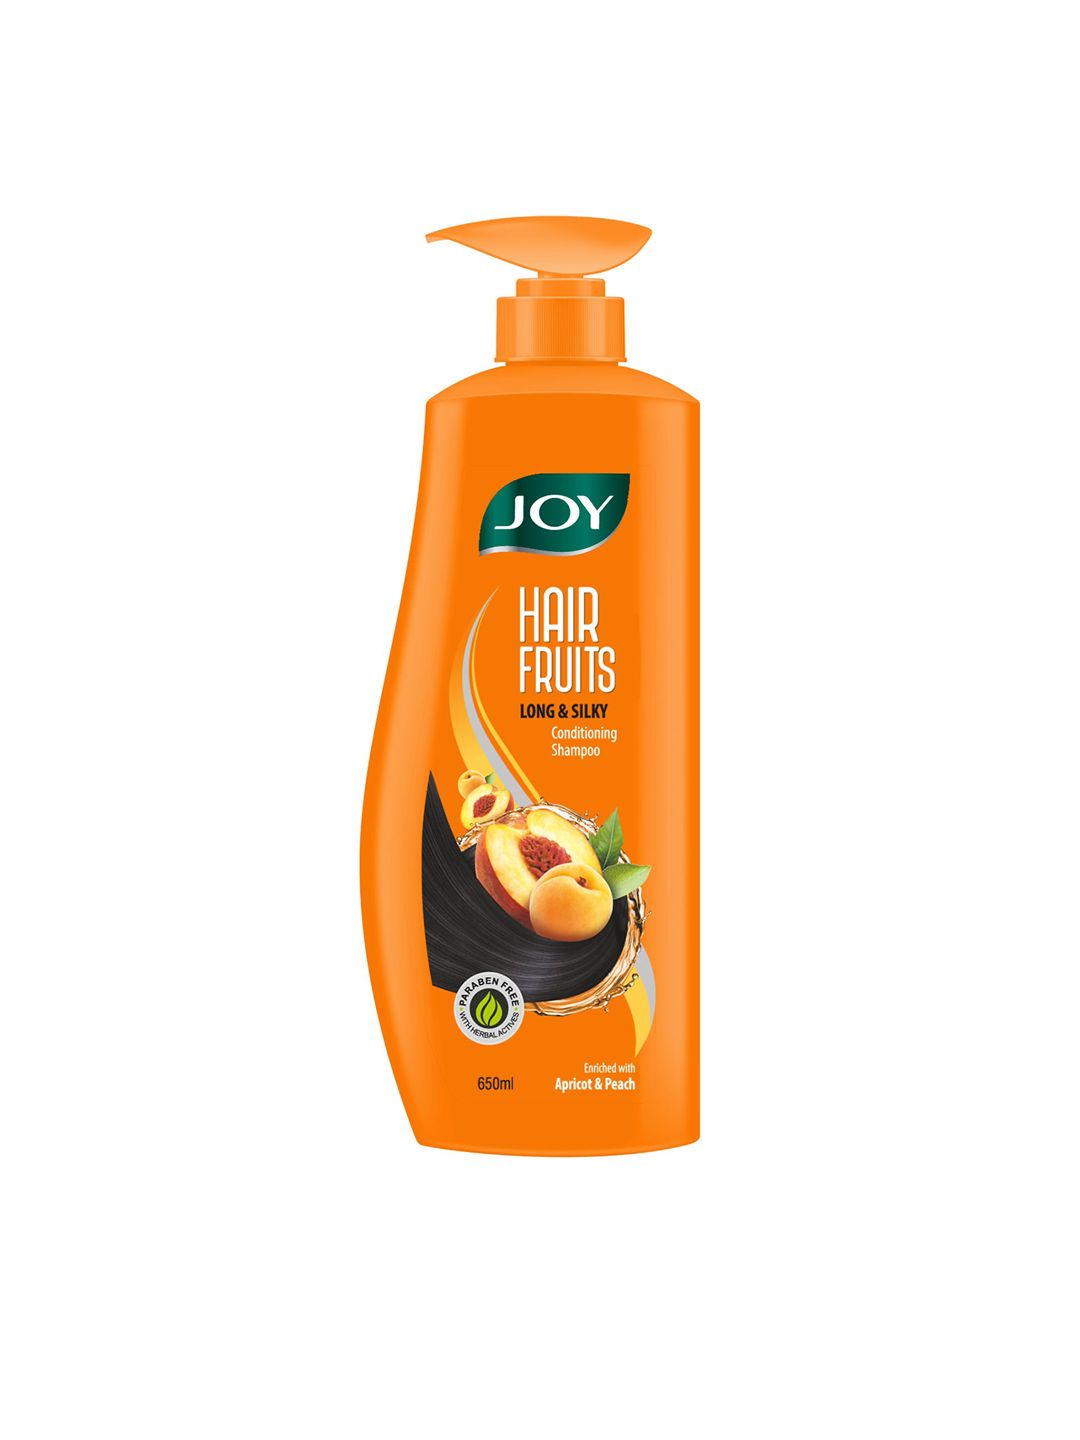 JOY Hair Fruits Long & Silky Conditioning Shampoo 650 ml Price in India